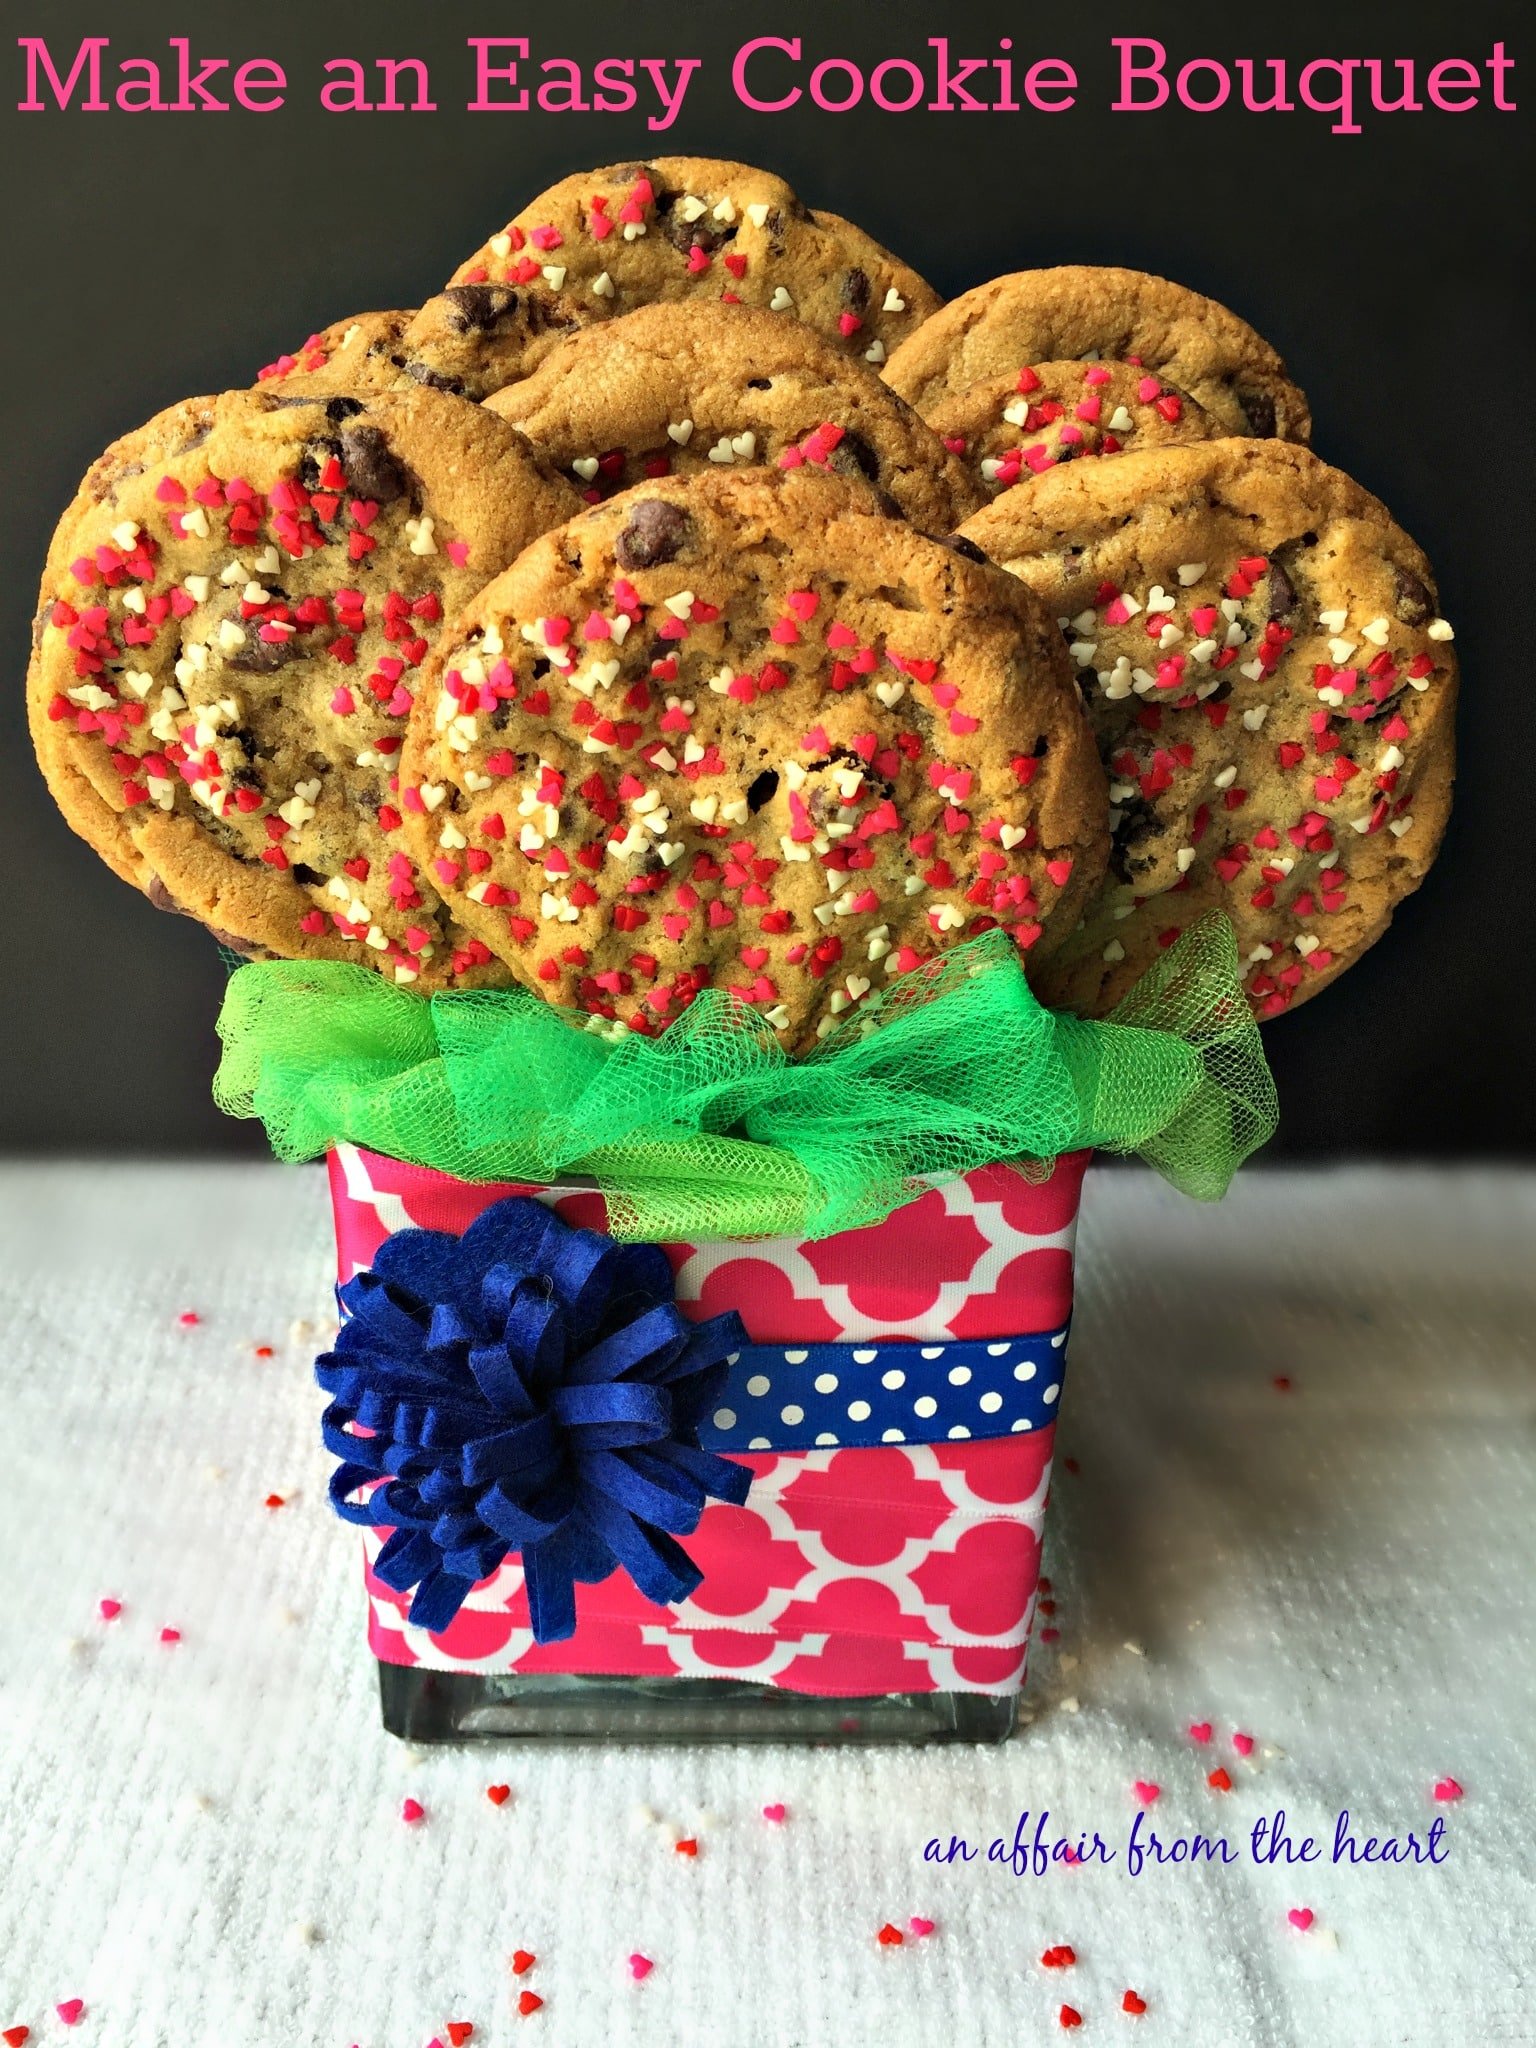 How to: Make an Easy Cookie Bouquet